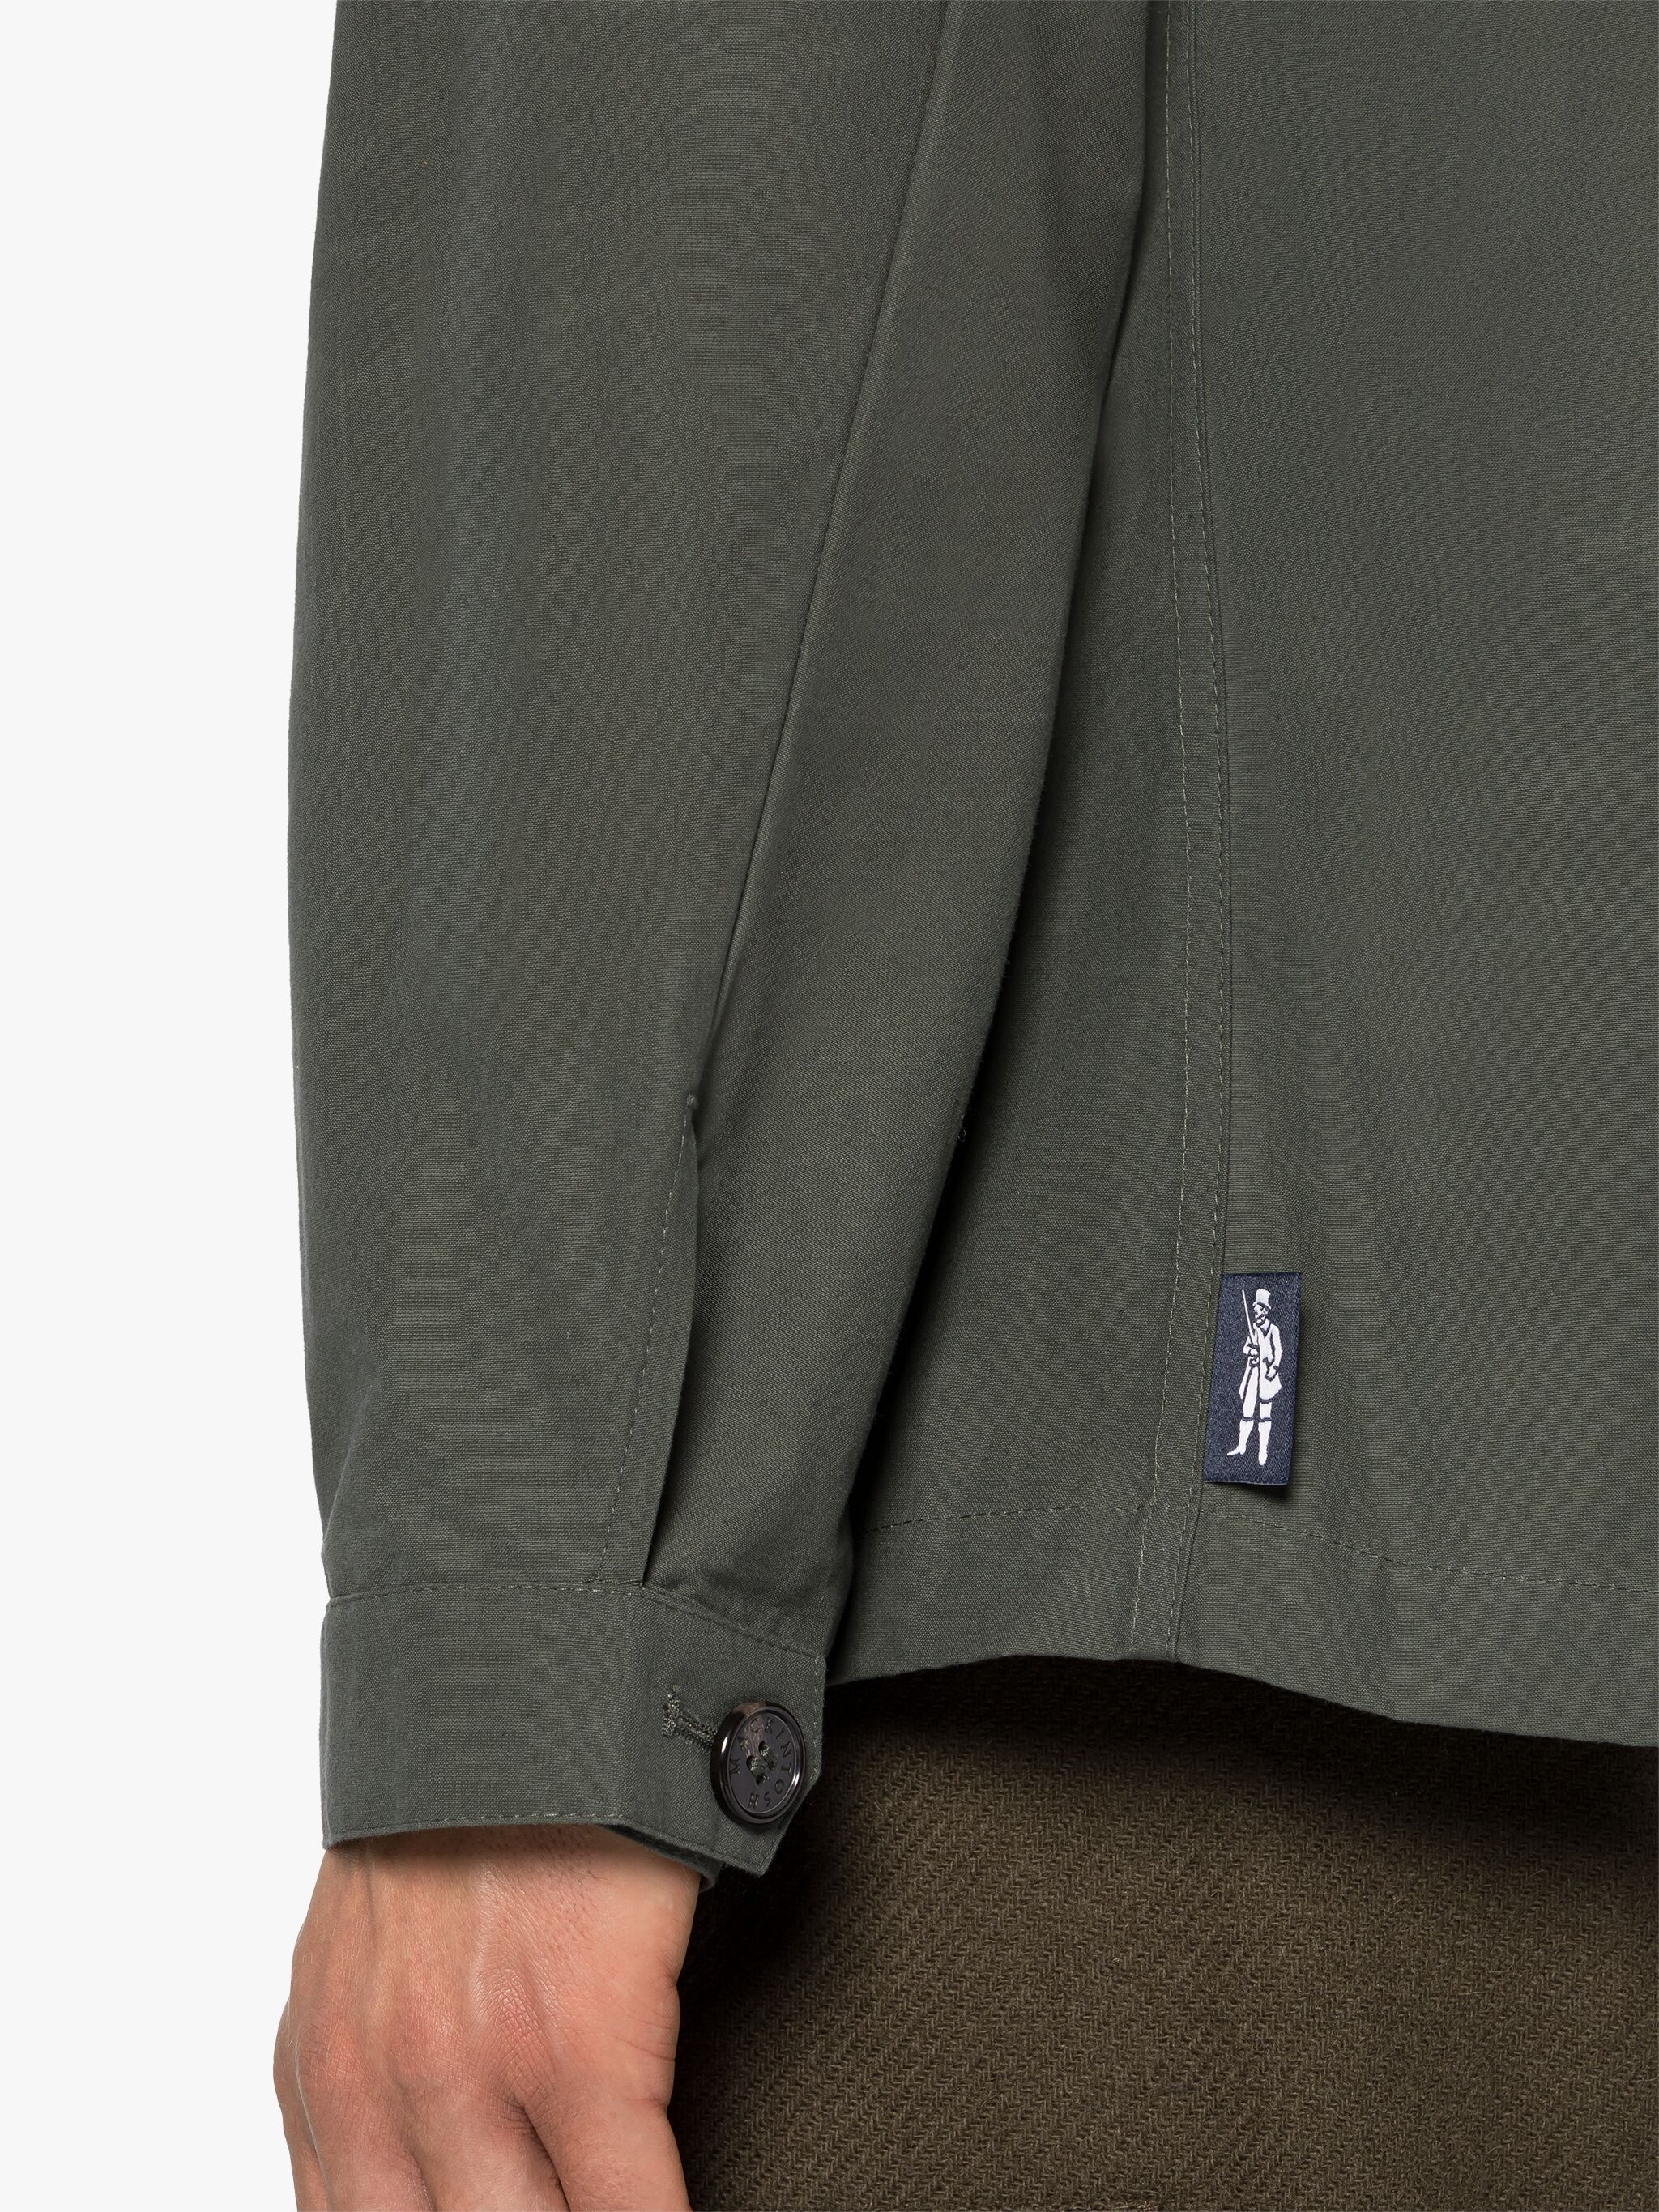 DRIZZLE GREEN WAXED COTTON CHORE JACKET - 6